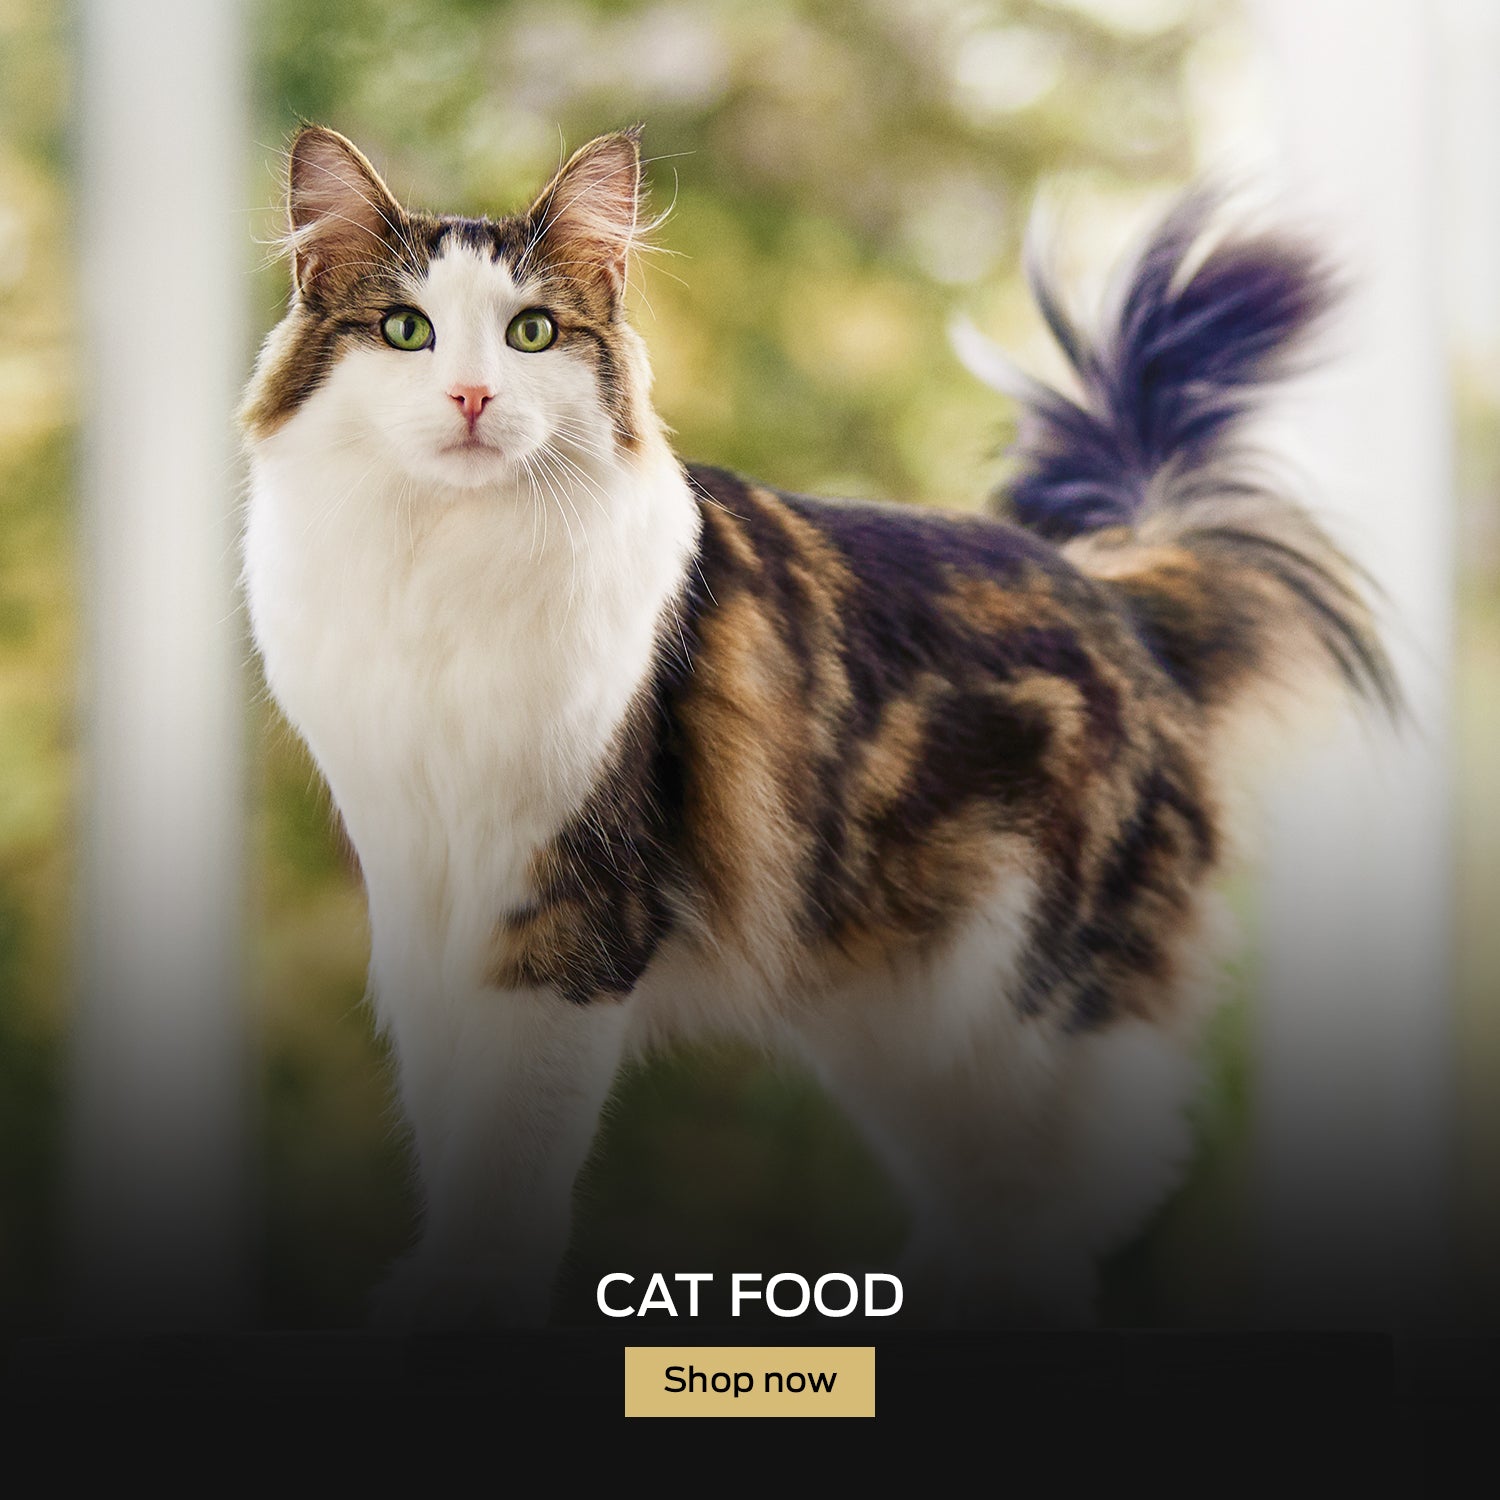 Buy Pro Plan Cat Food Online in Canada at everyday low prices at PetMax.ca